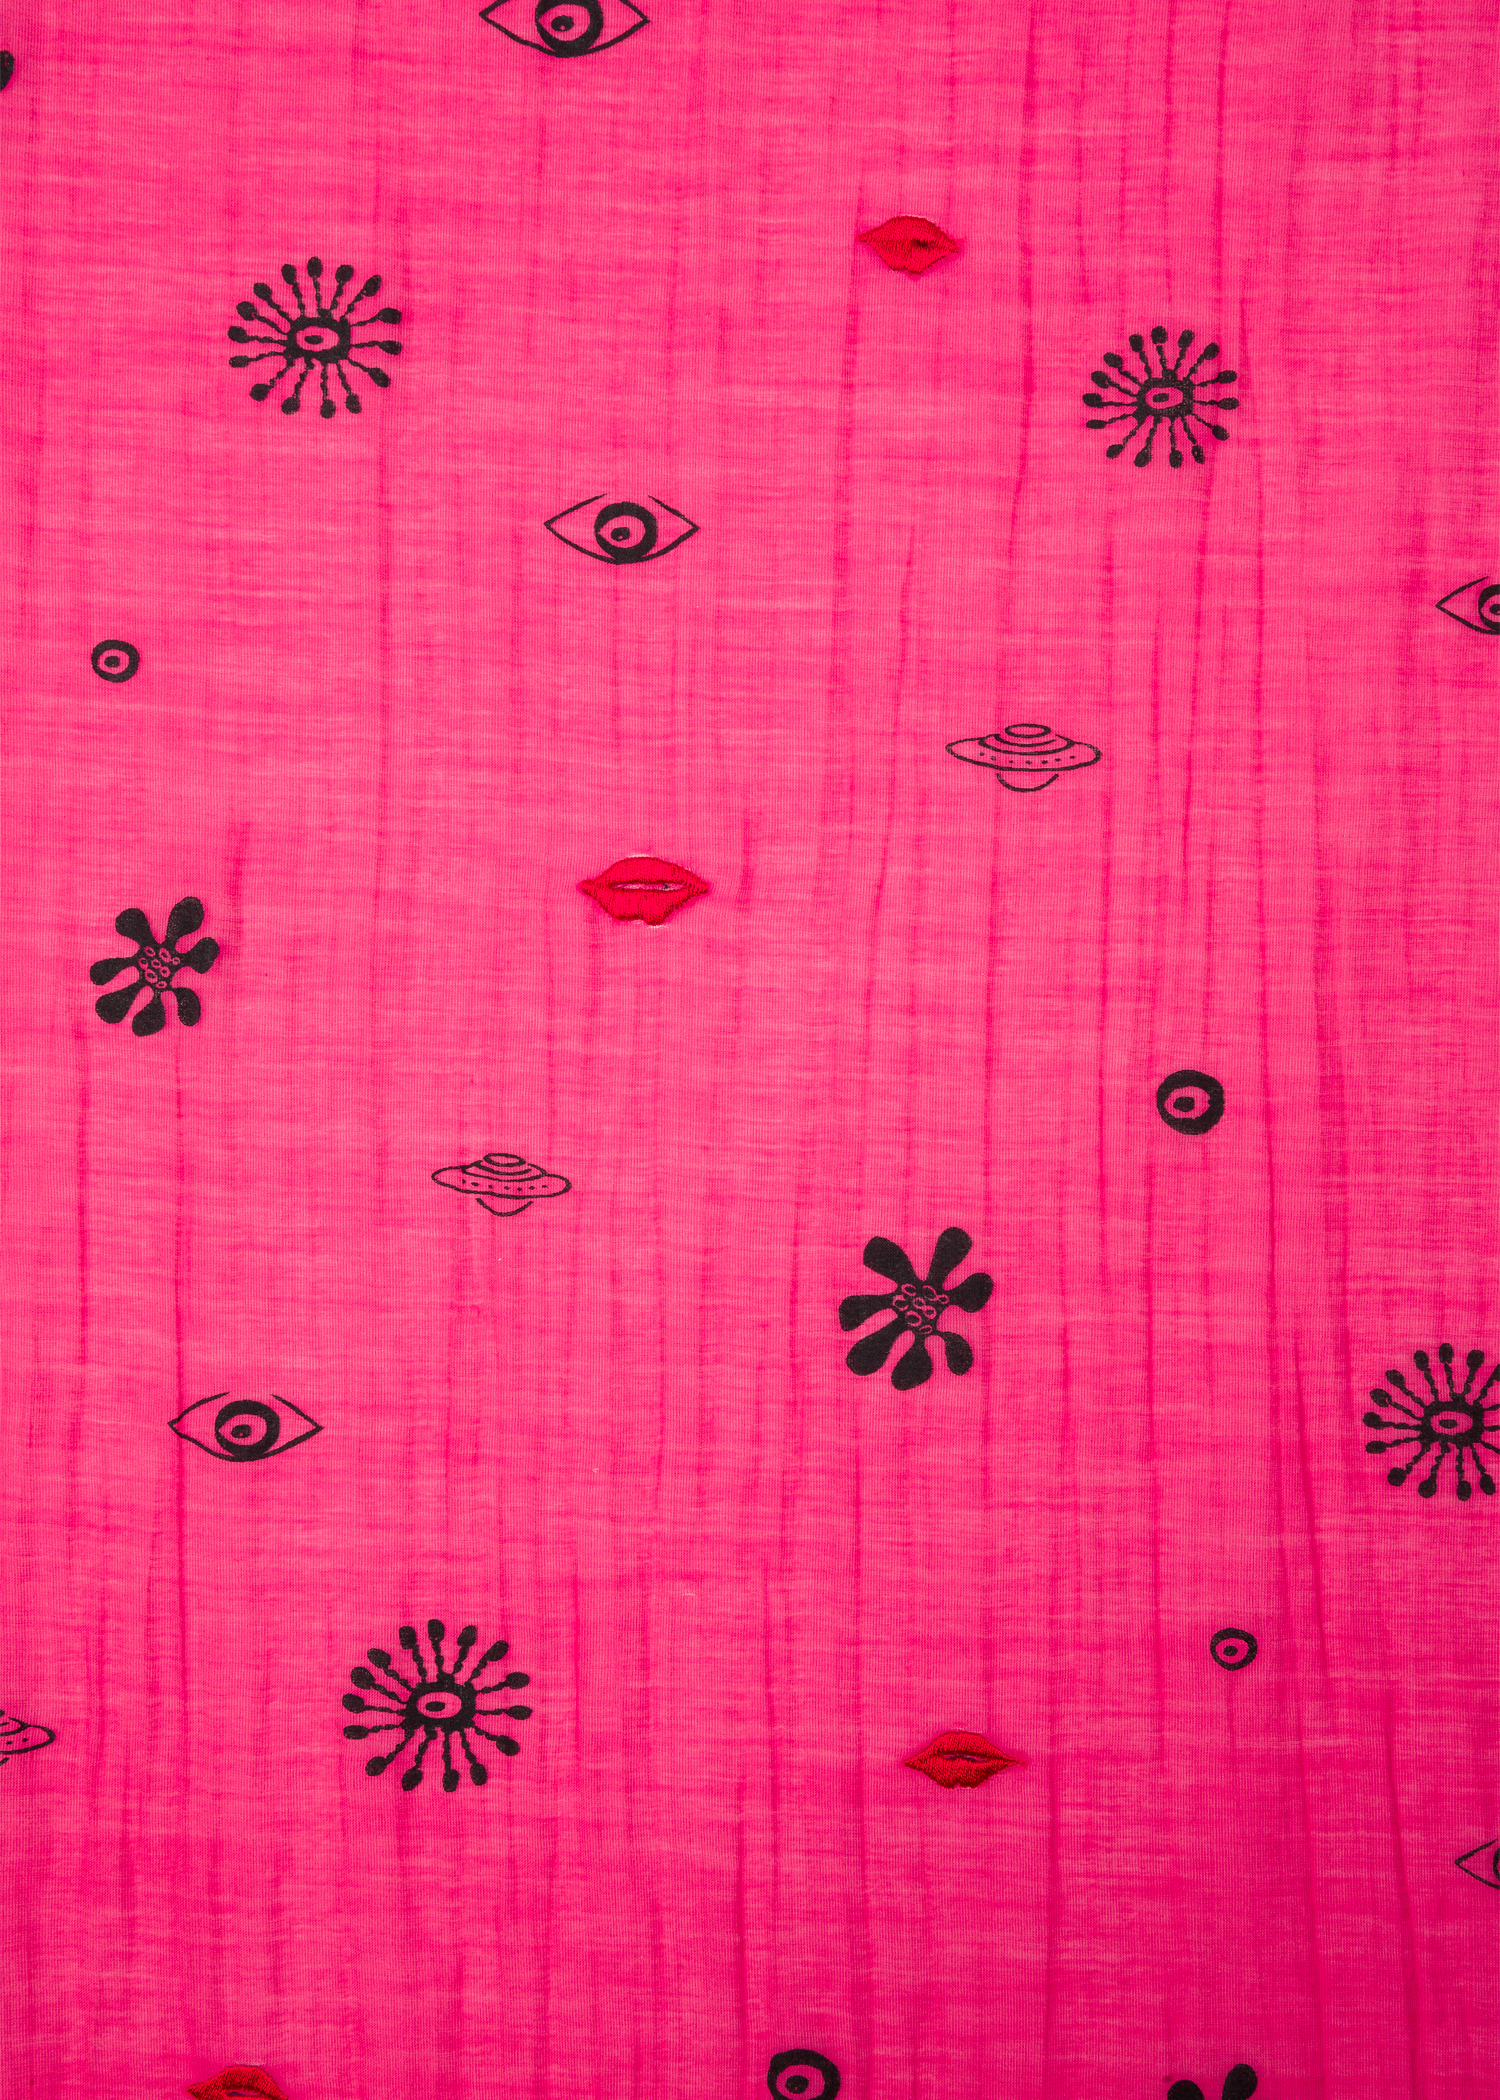 Flat view - Women's Fuchsia Embroidered 'Galaxy' Cotton And Silk-Blend Scarf Paul Smith